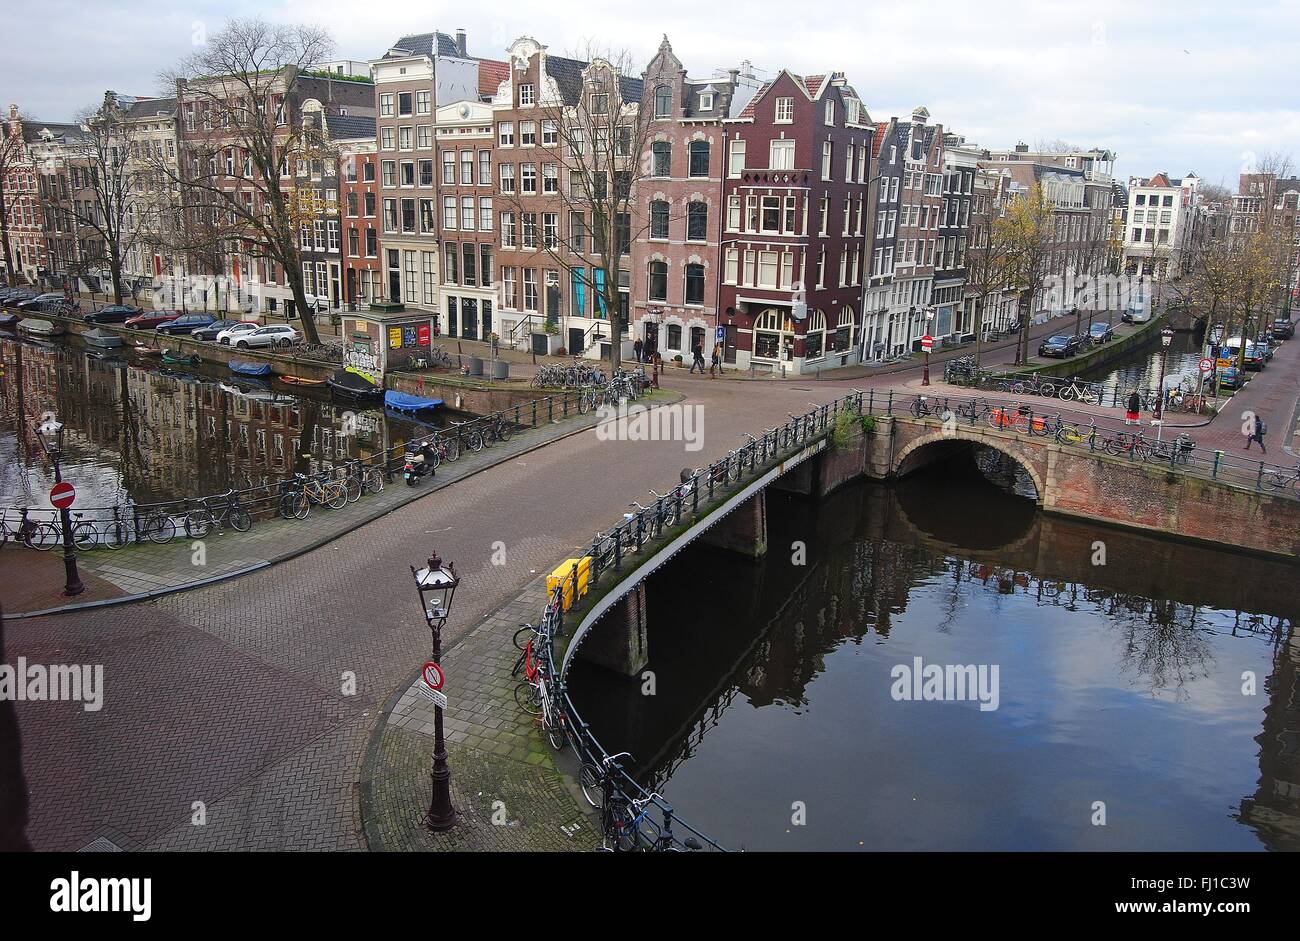 Singel canal in Amsterdam Stock Photo